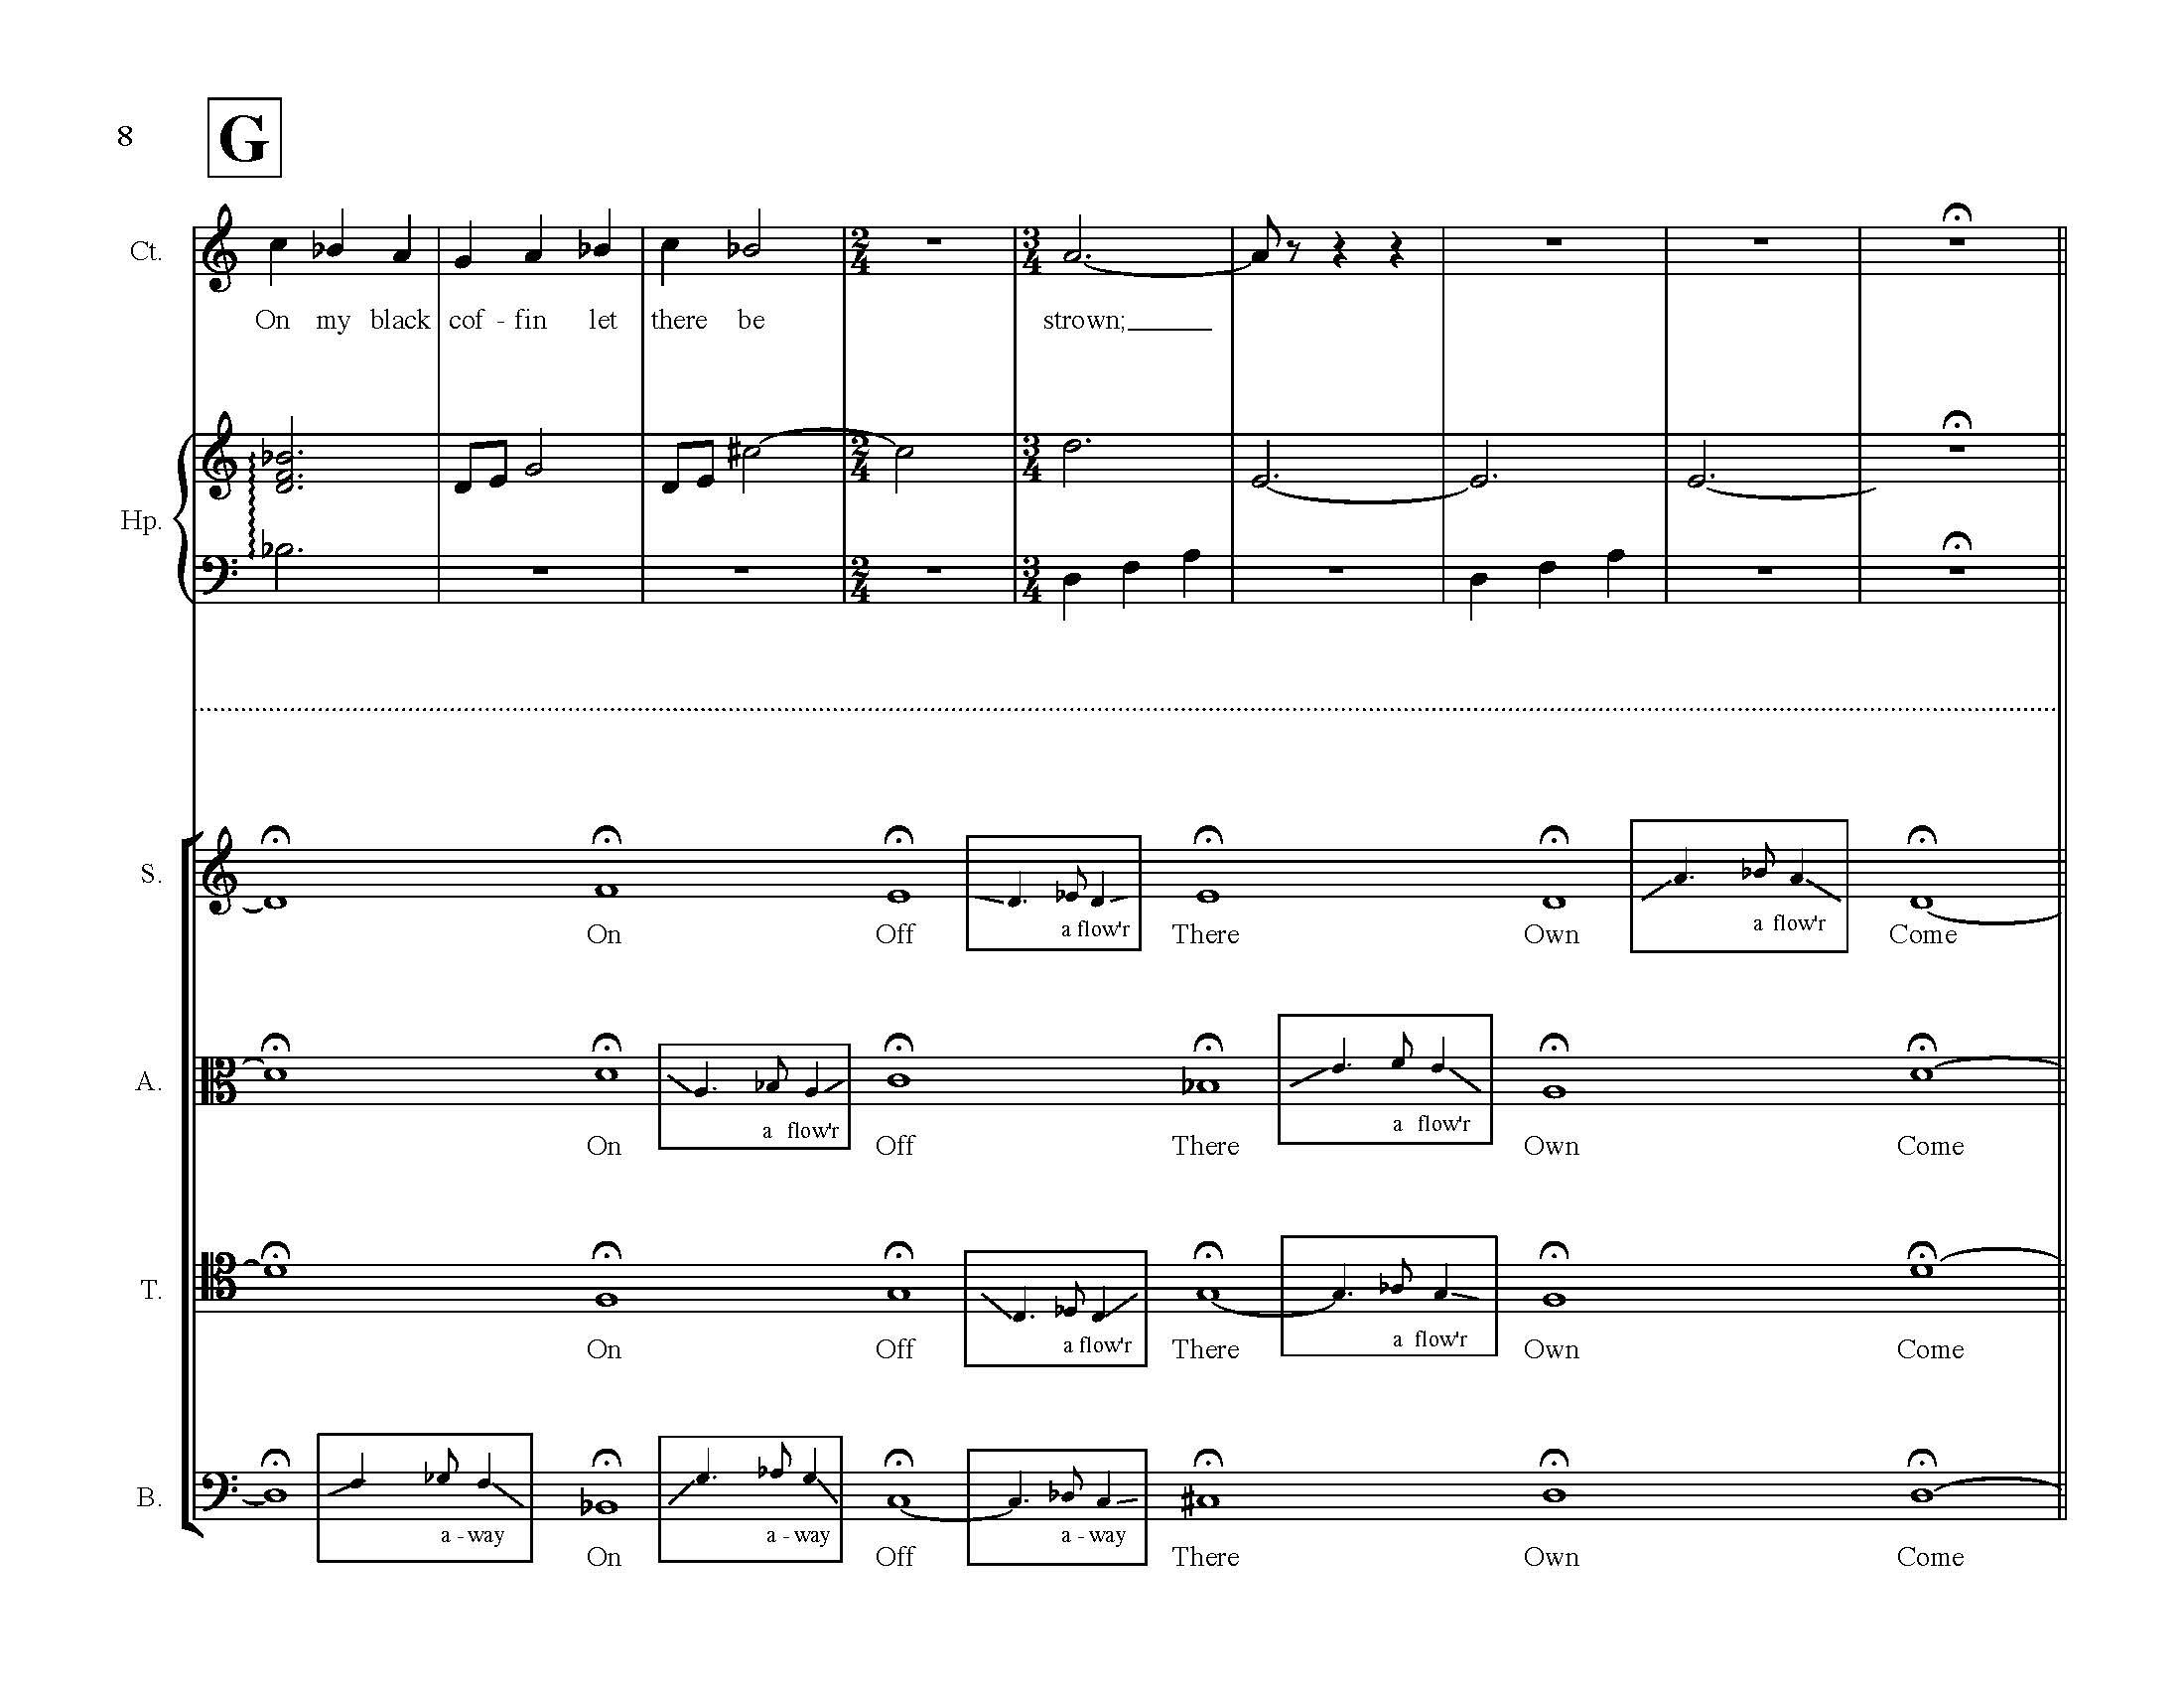 Come Away Death - Complete Score_Page_14.jpg